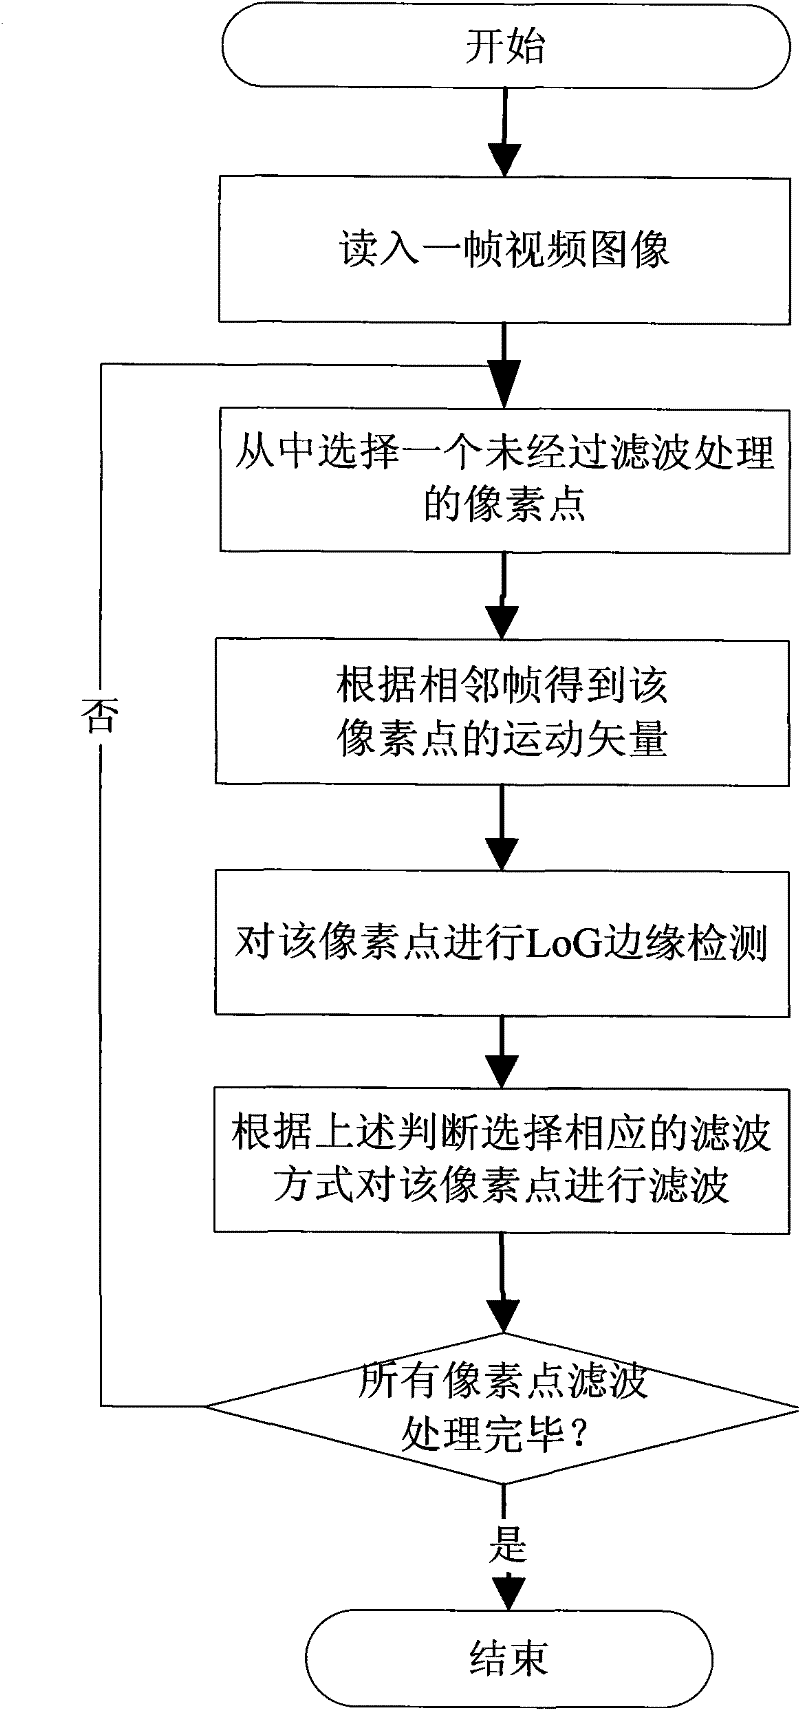 A method and device for adaptively denoising video images